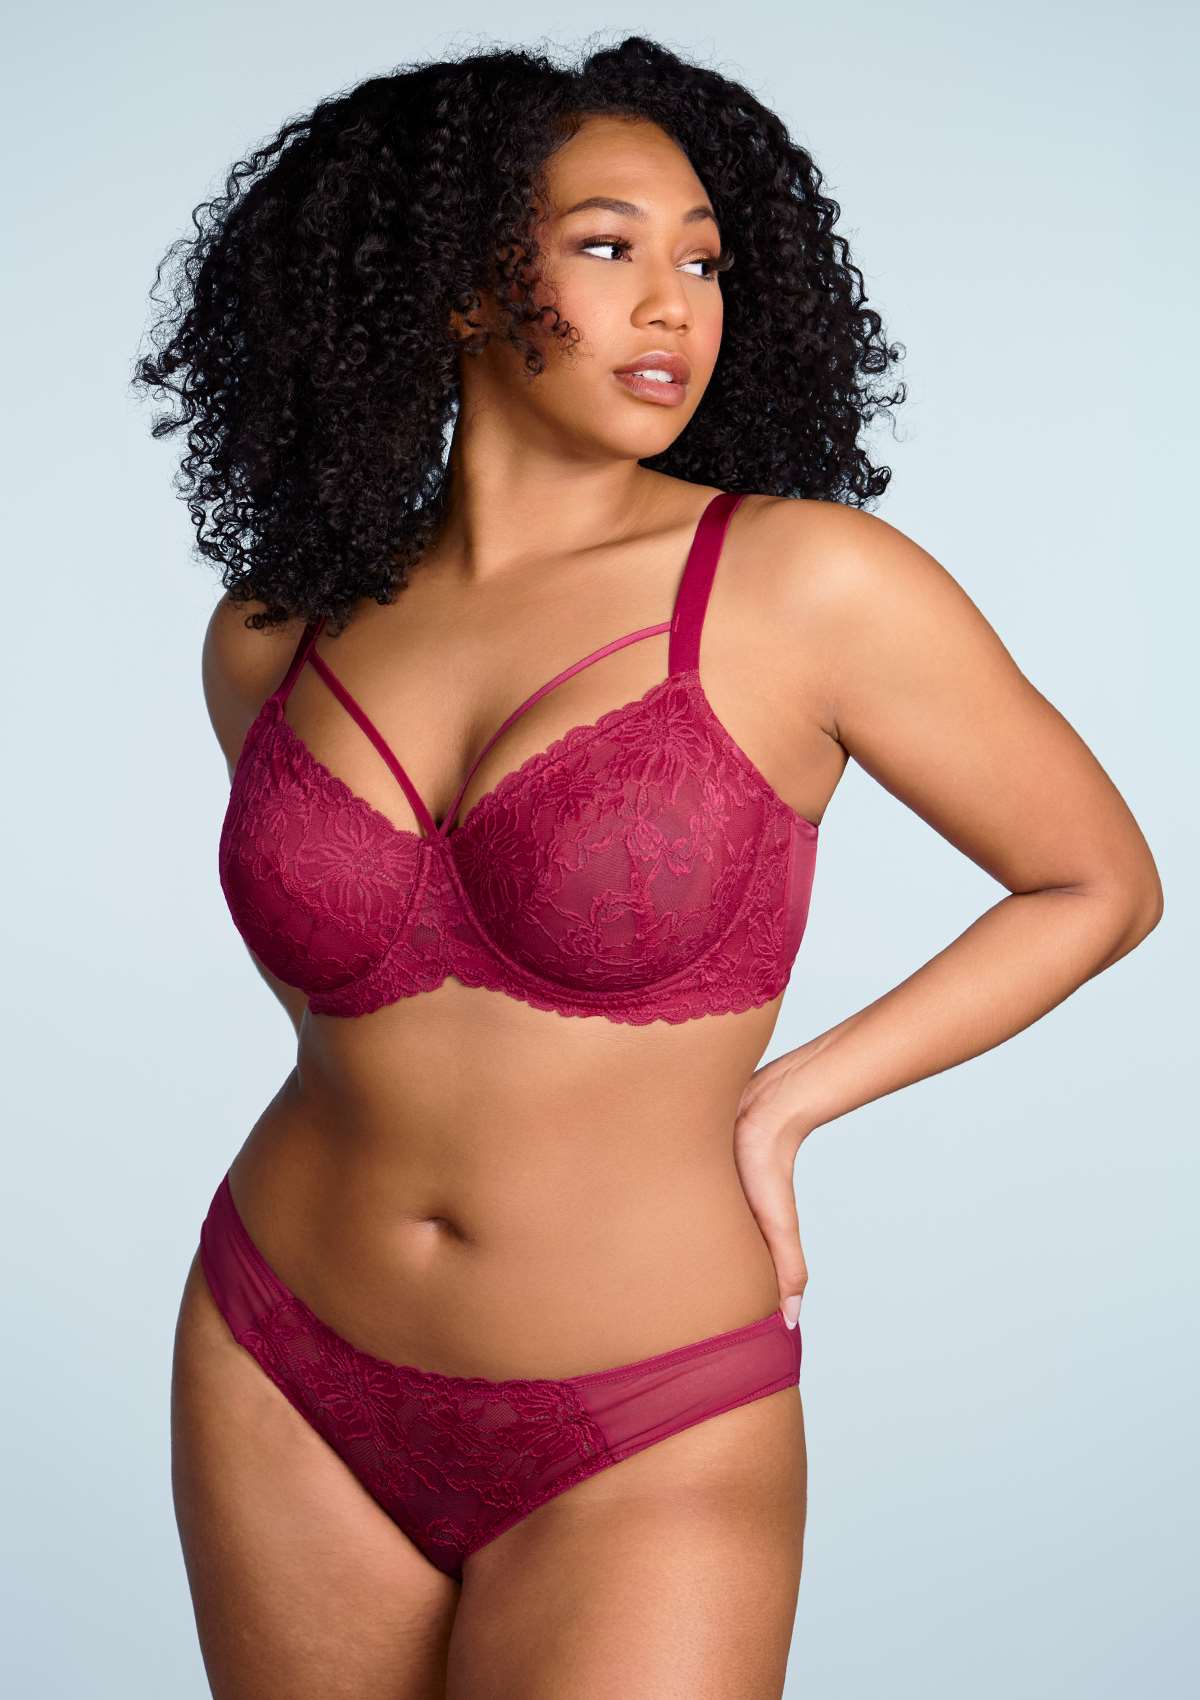 HSIA Pretty In Petals Lace Panties And Bra Set: Plus Size Women Bra - Red / 46 / D